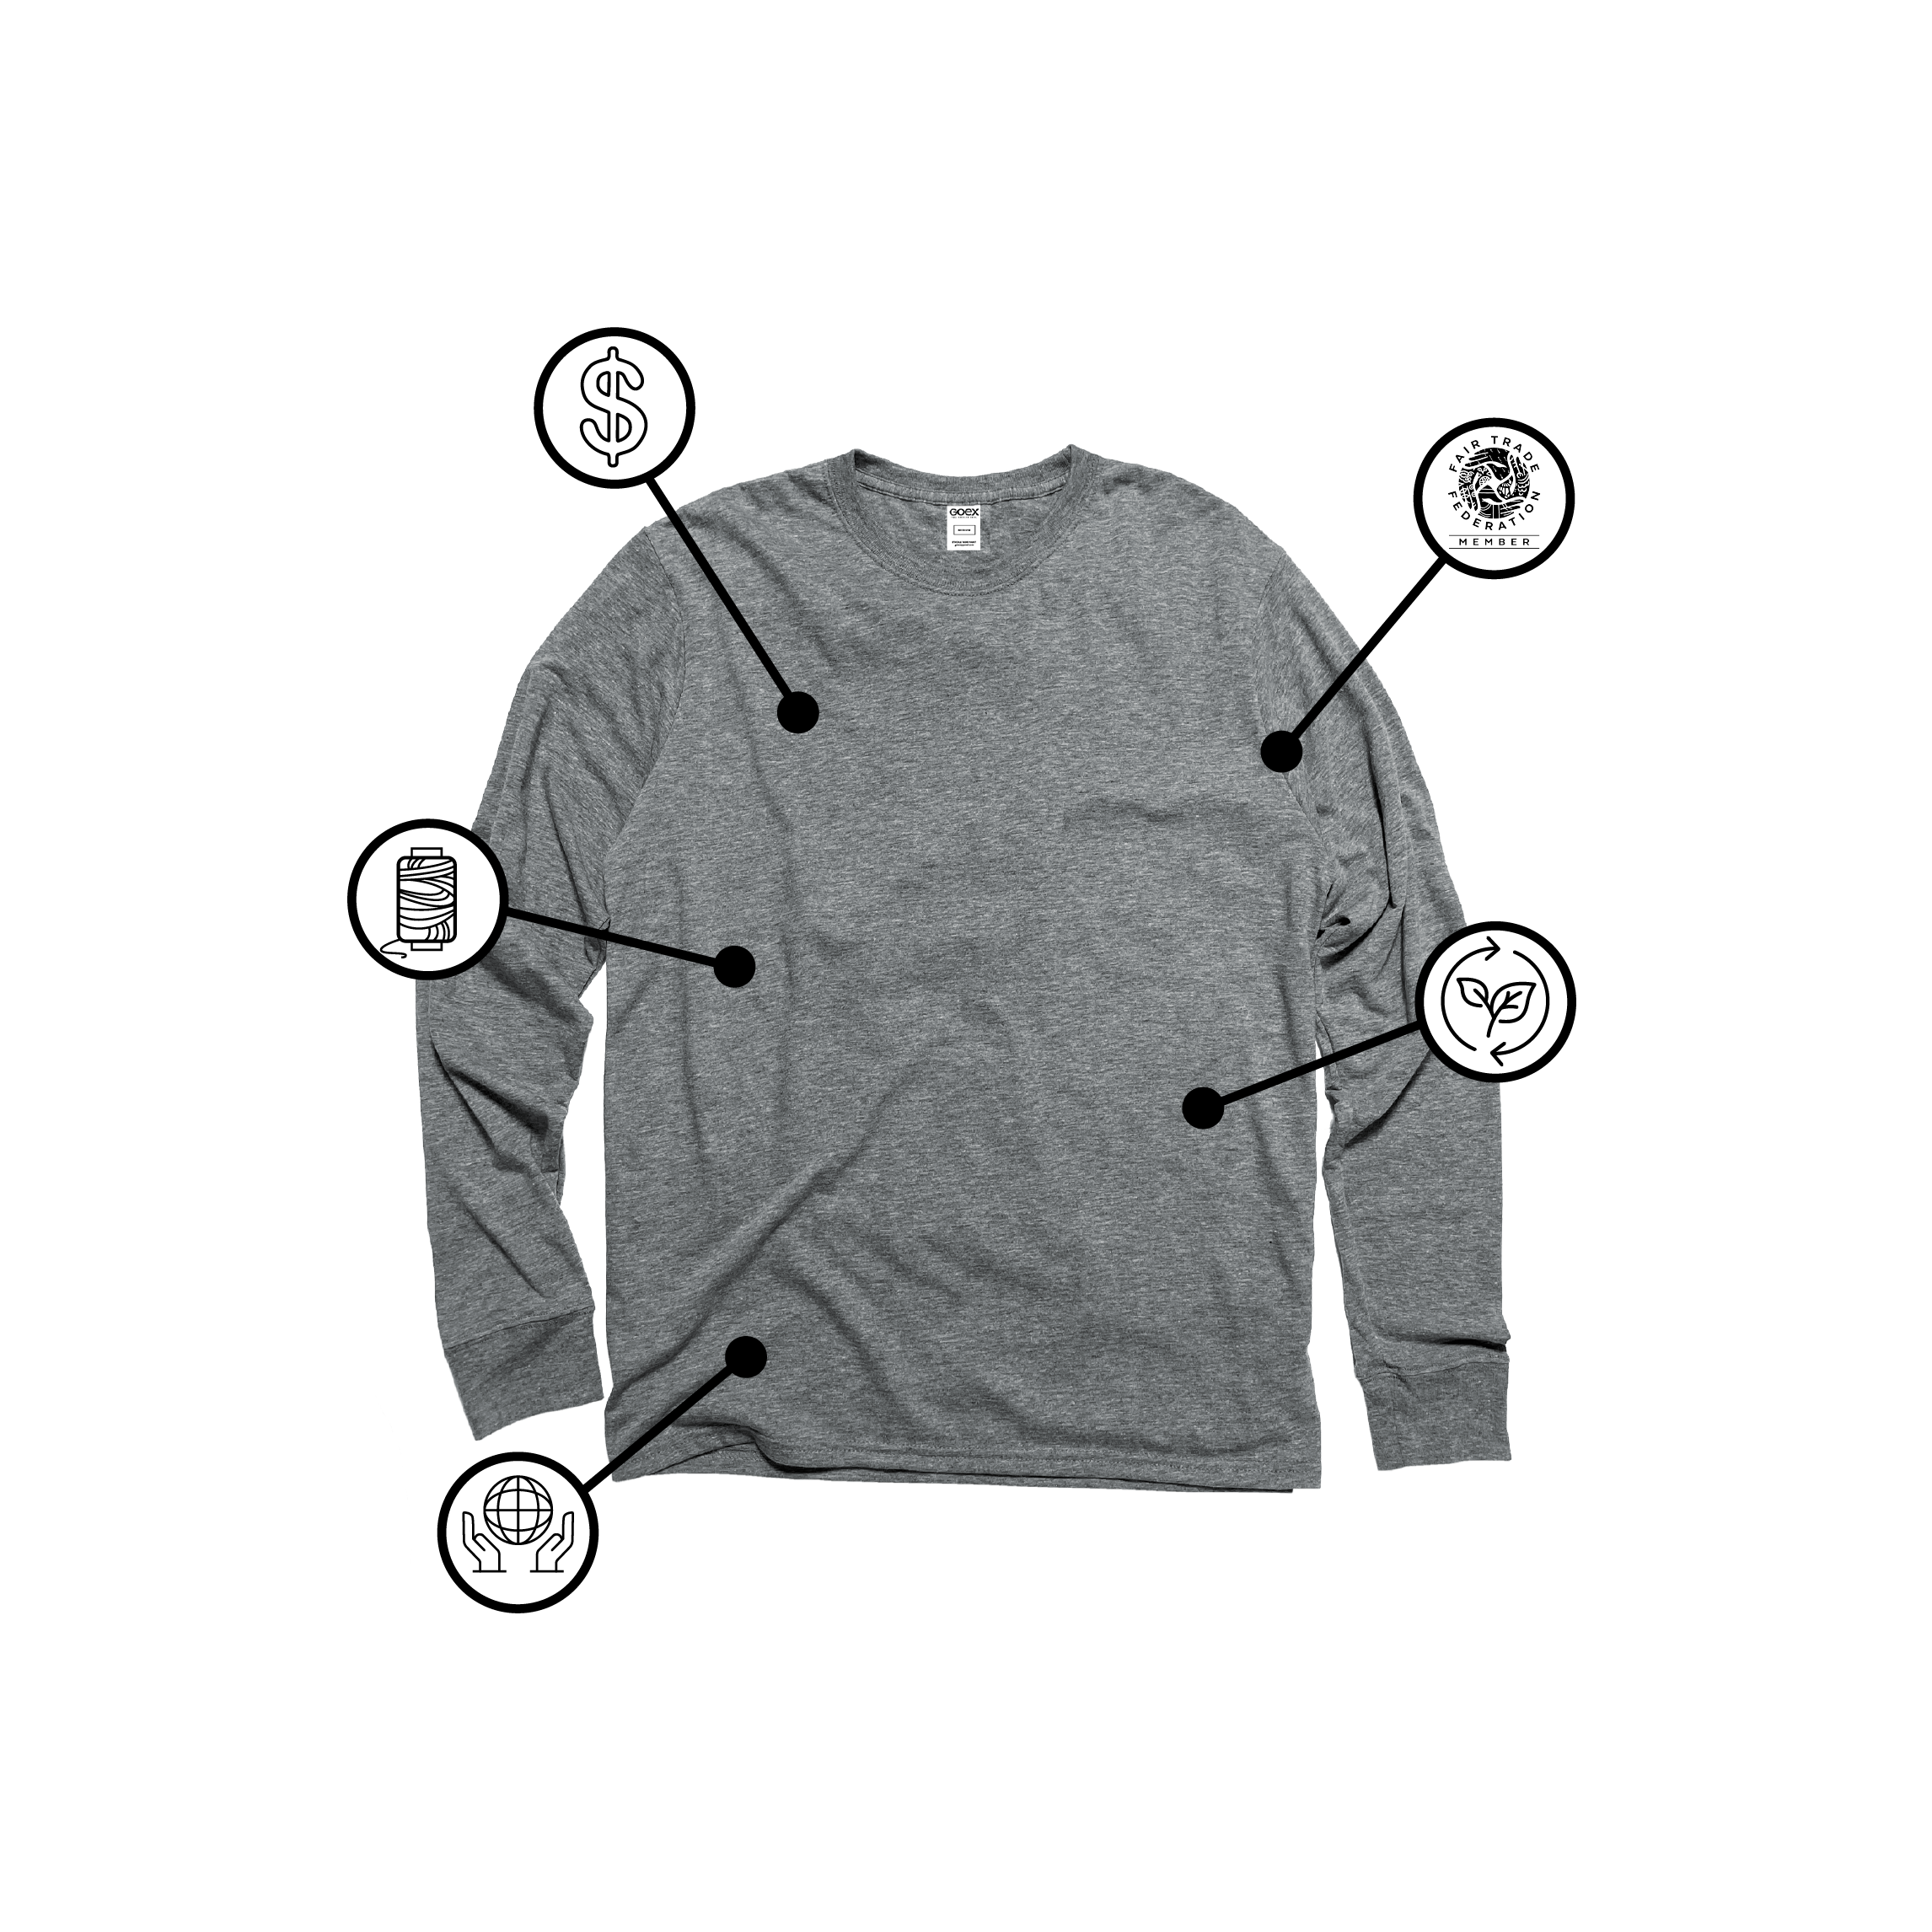 GOEX Apparel Unisex and Men's Eco Triblend Long Sleeve Tee in Heather Grey with Icons